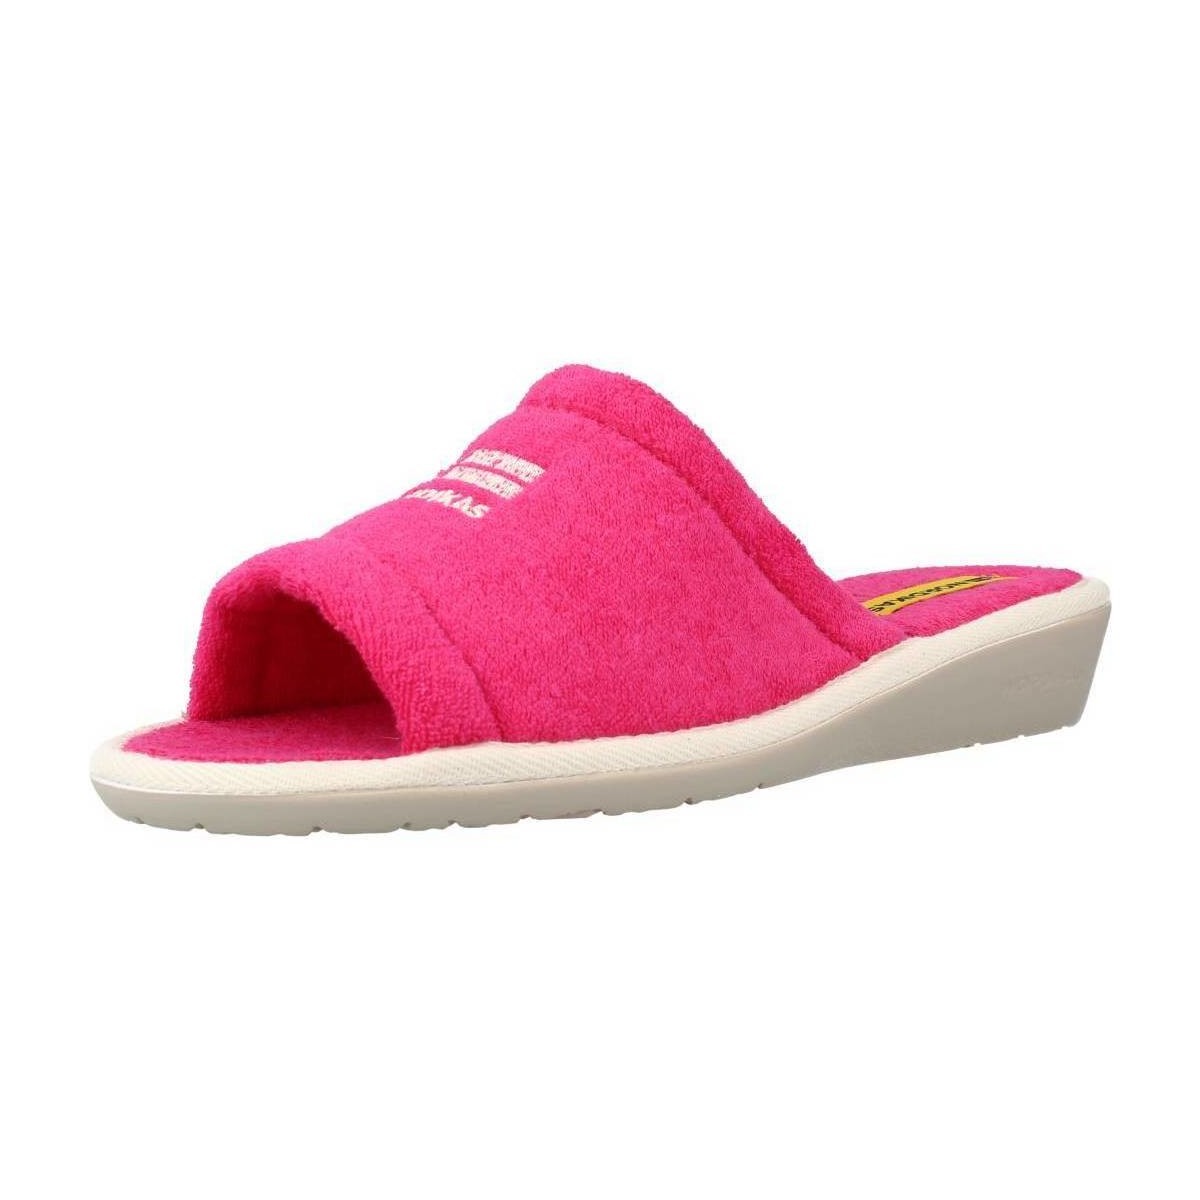 Nordikas - Womens Slippers Pink by Spartoo GOOFASH